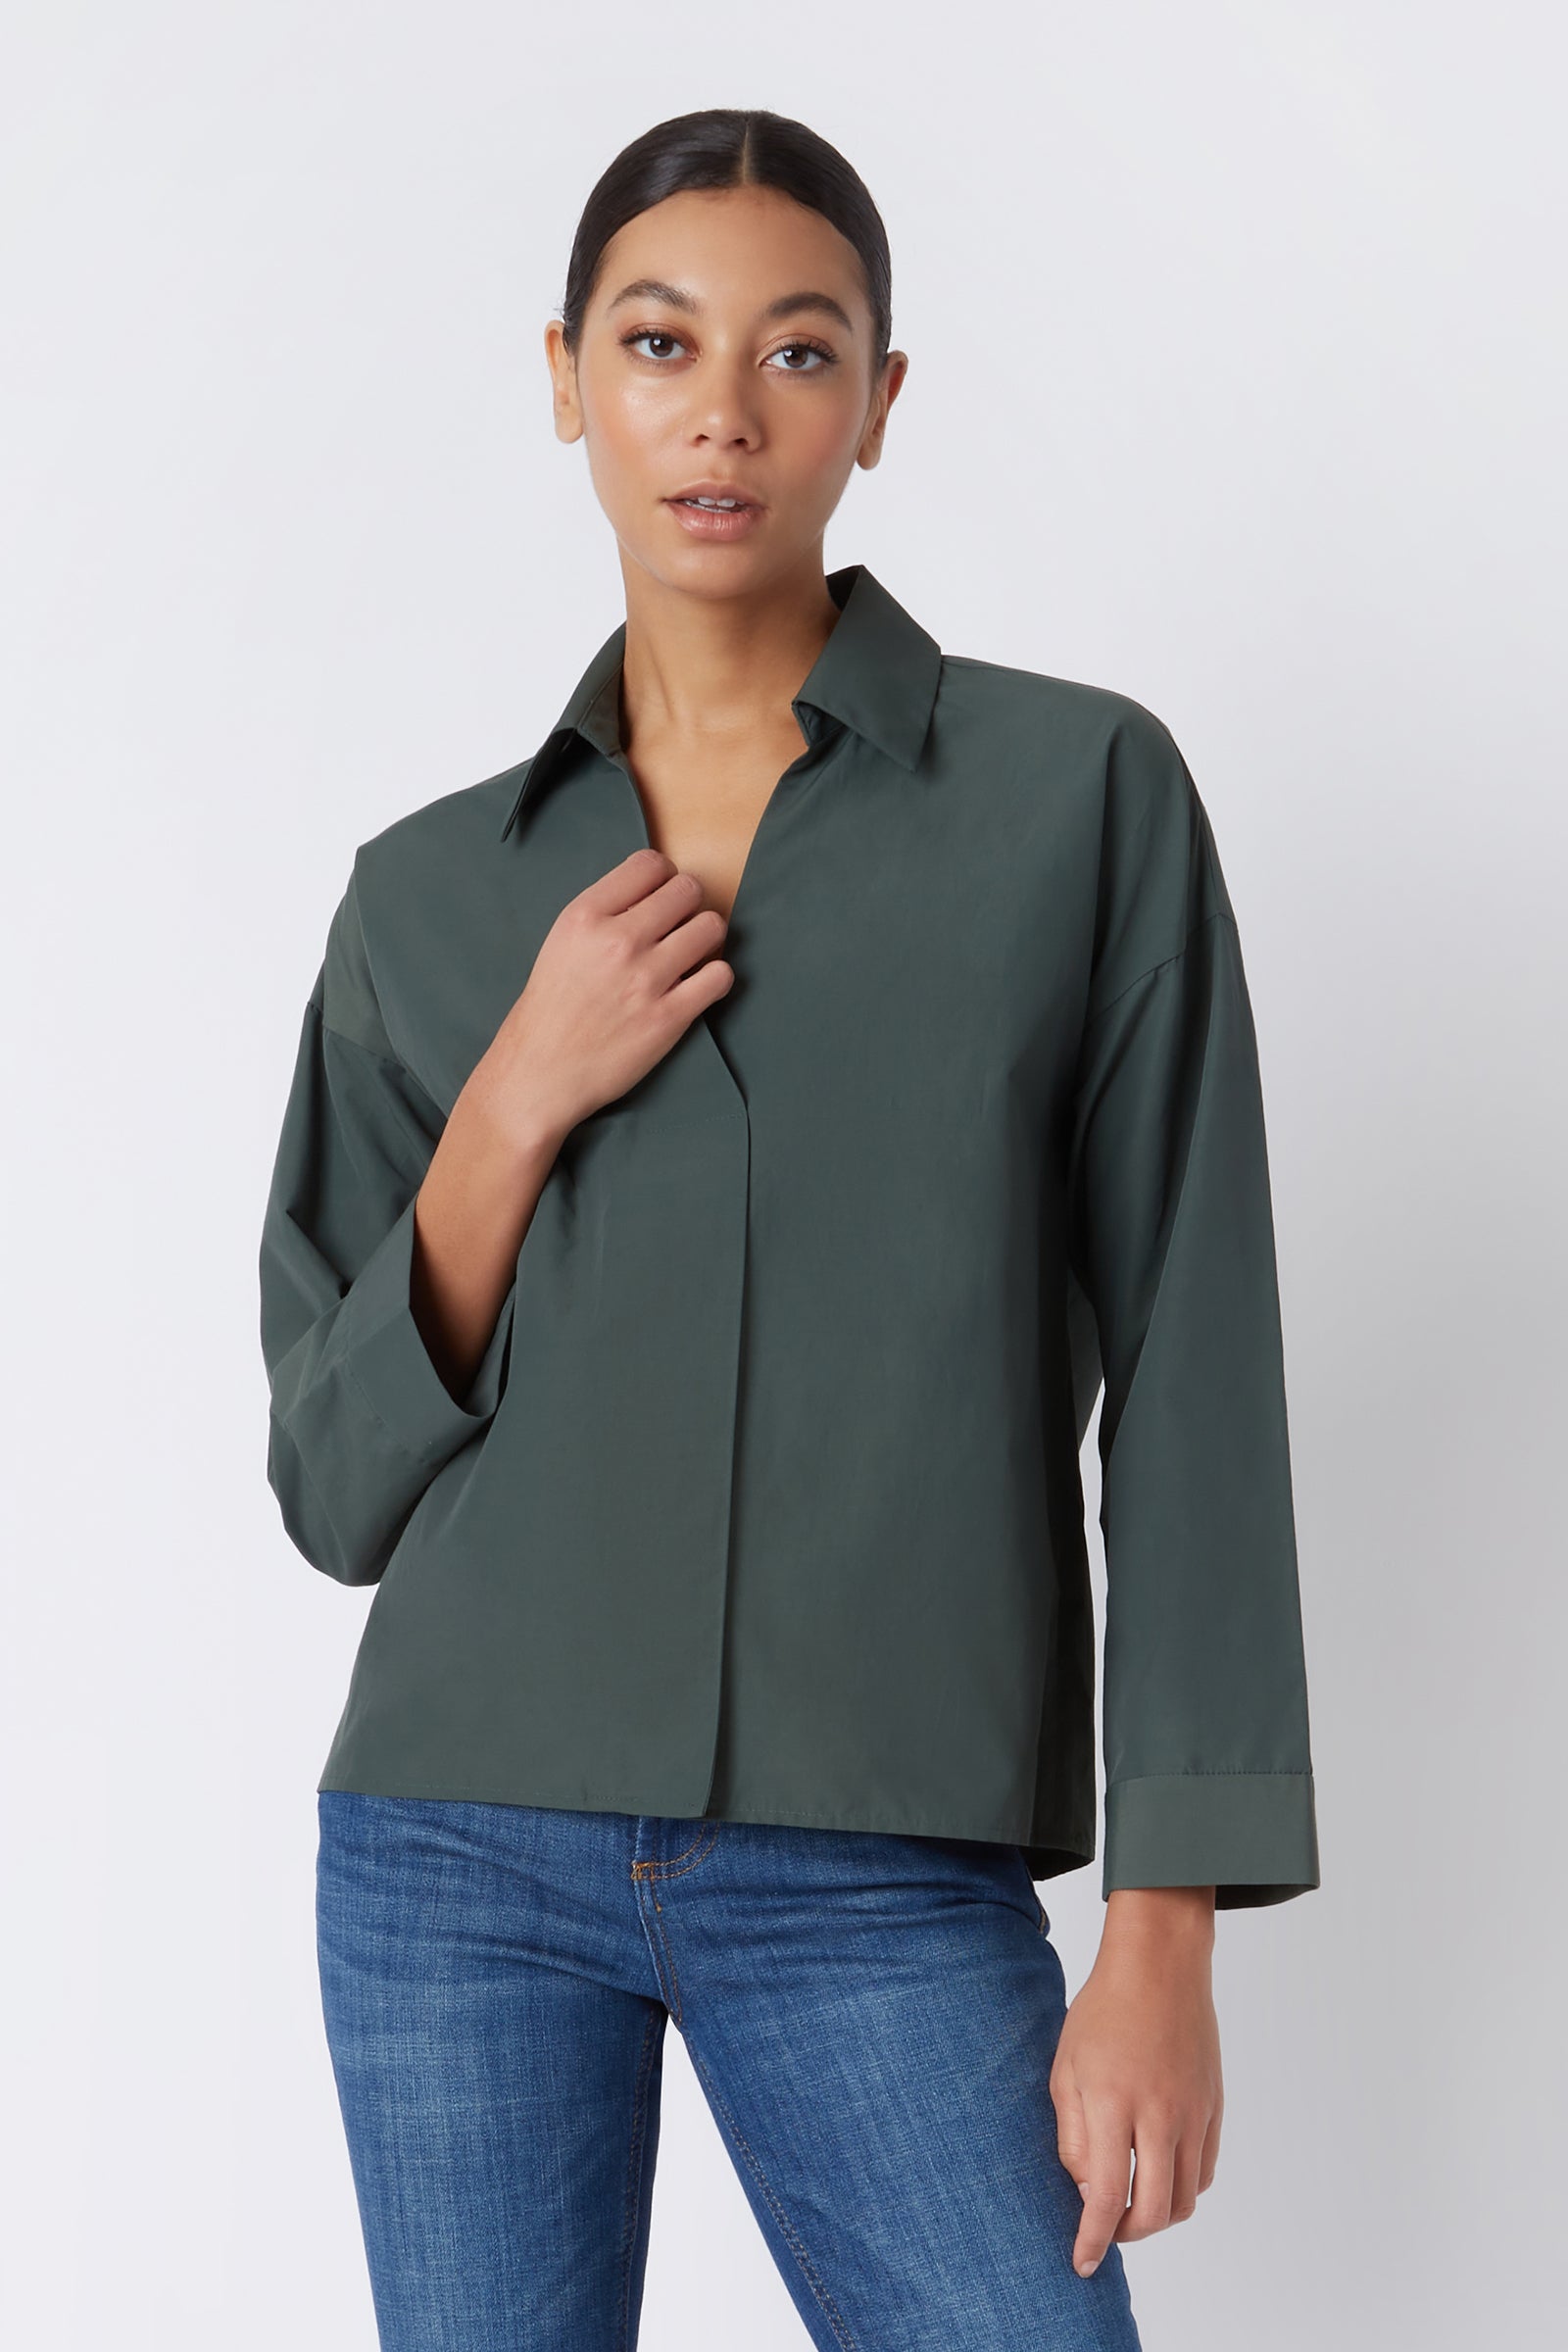 Kal Rieman Emma Collared Kimono in Loden Green on Model Cropped Front View